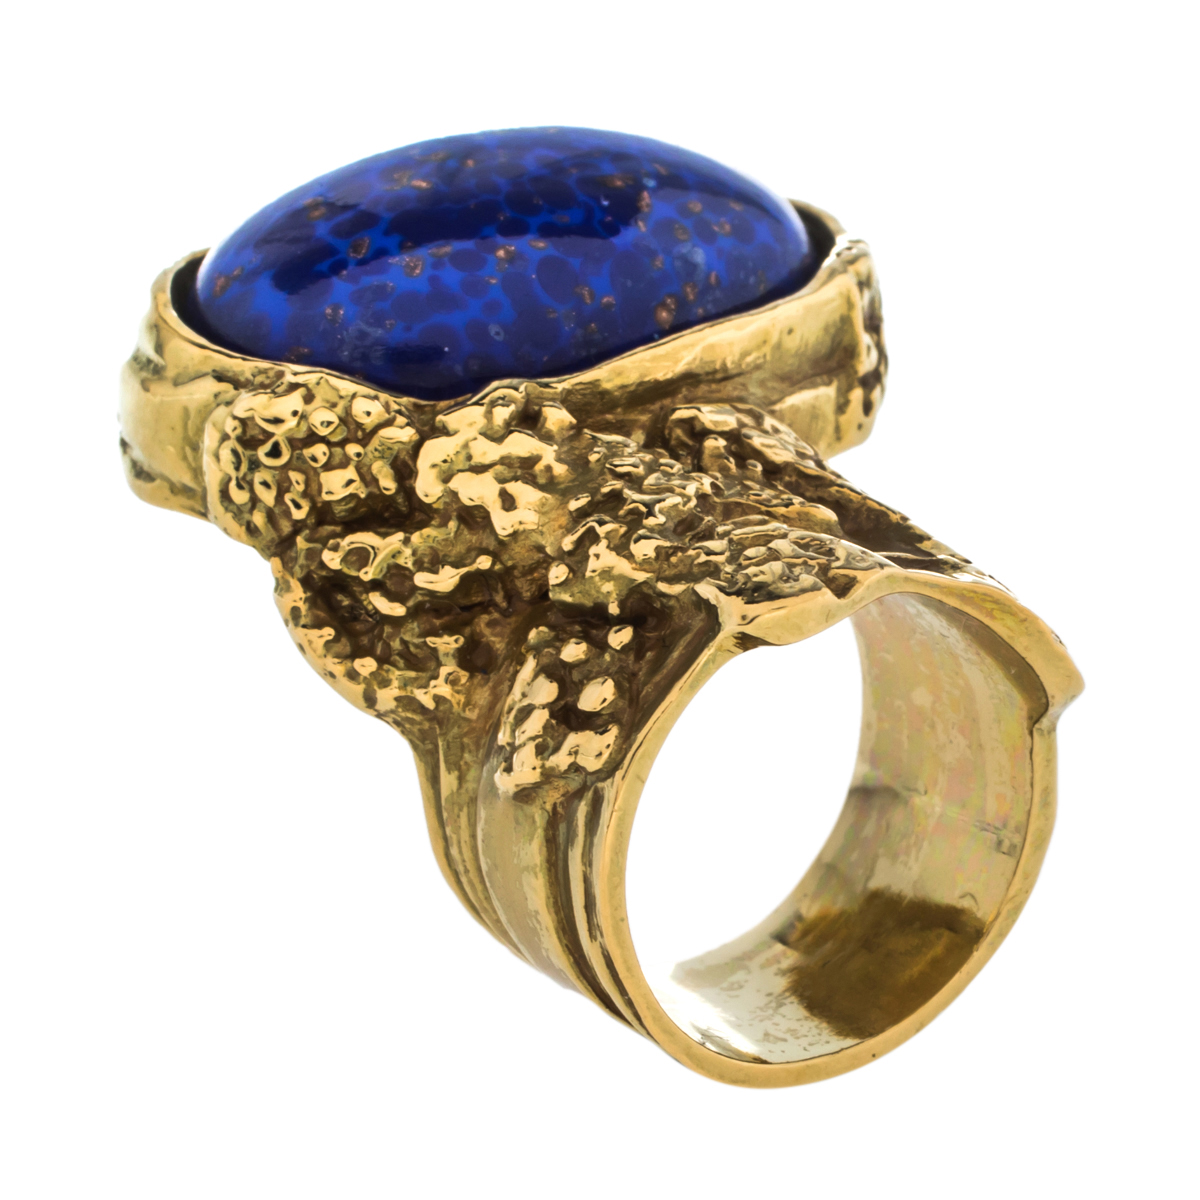 Yves Saint Laurent Blue Cabochon Gold Tone Arty Ring Size 6